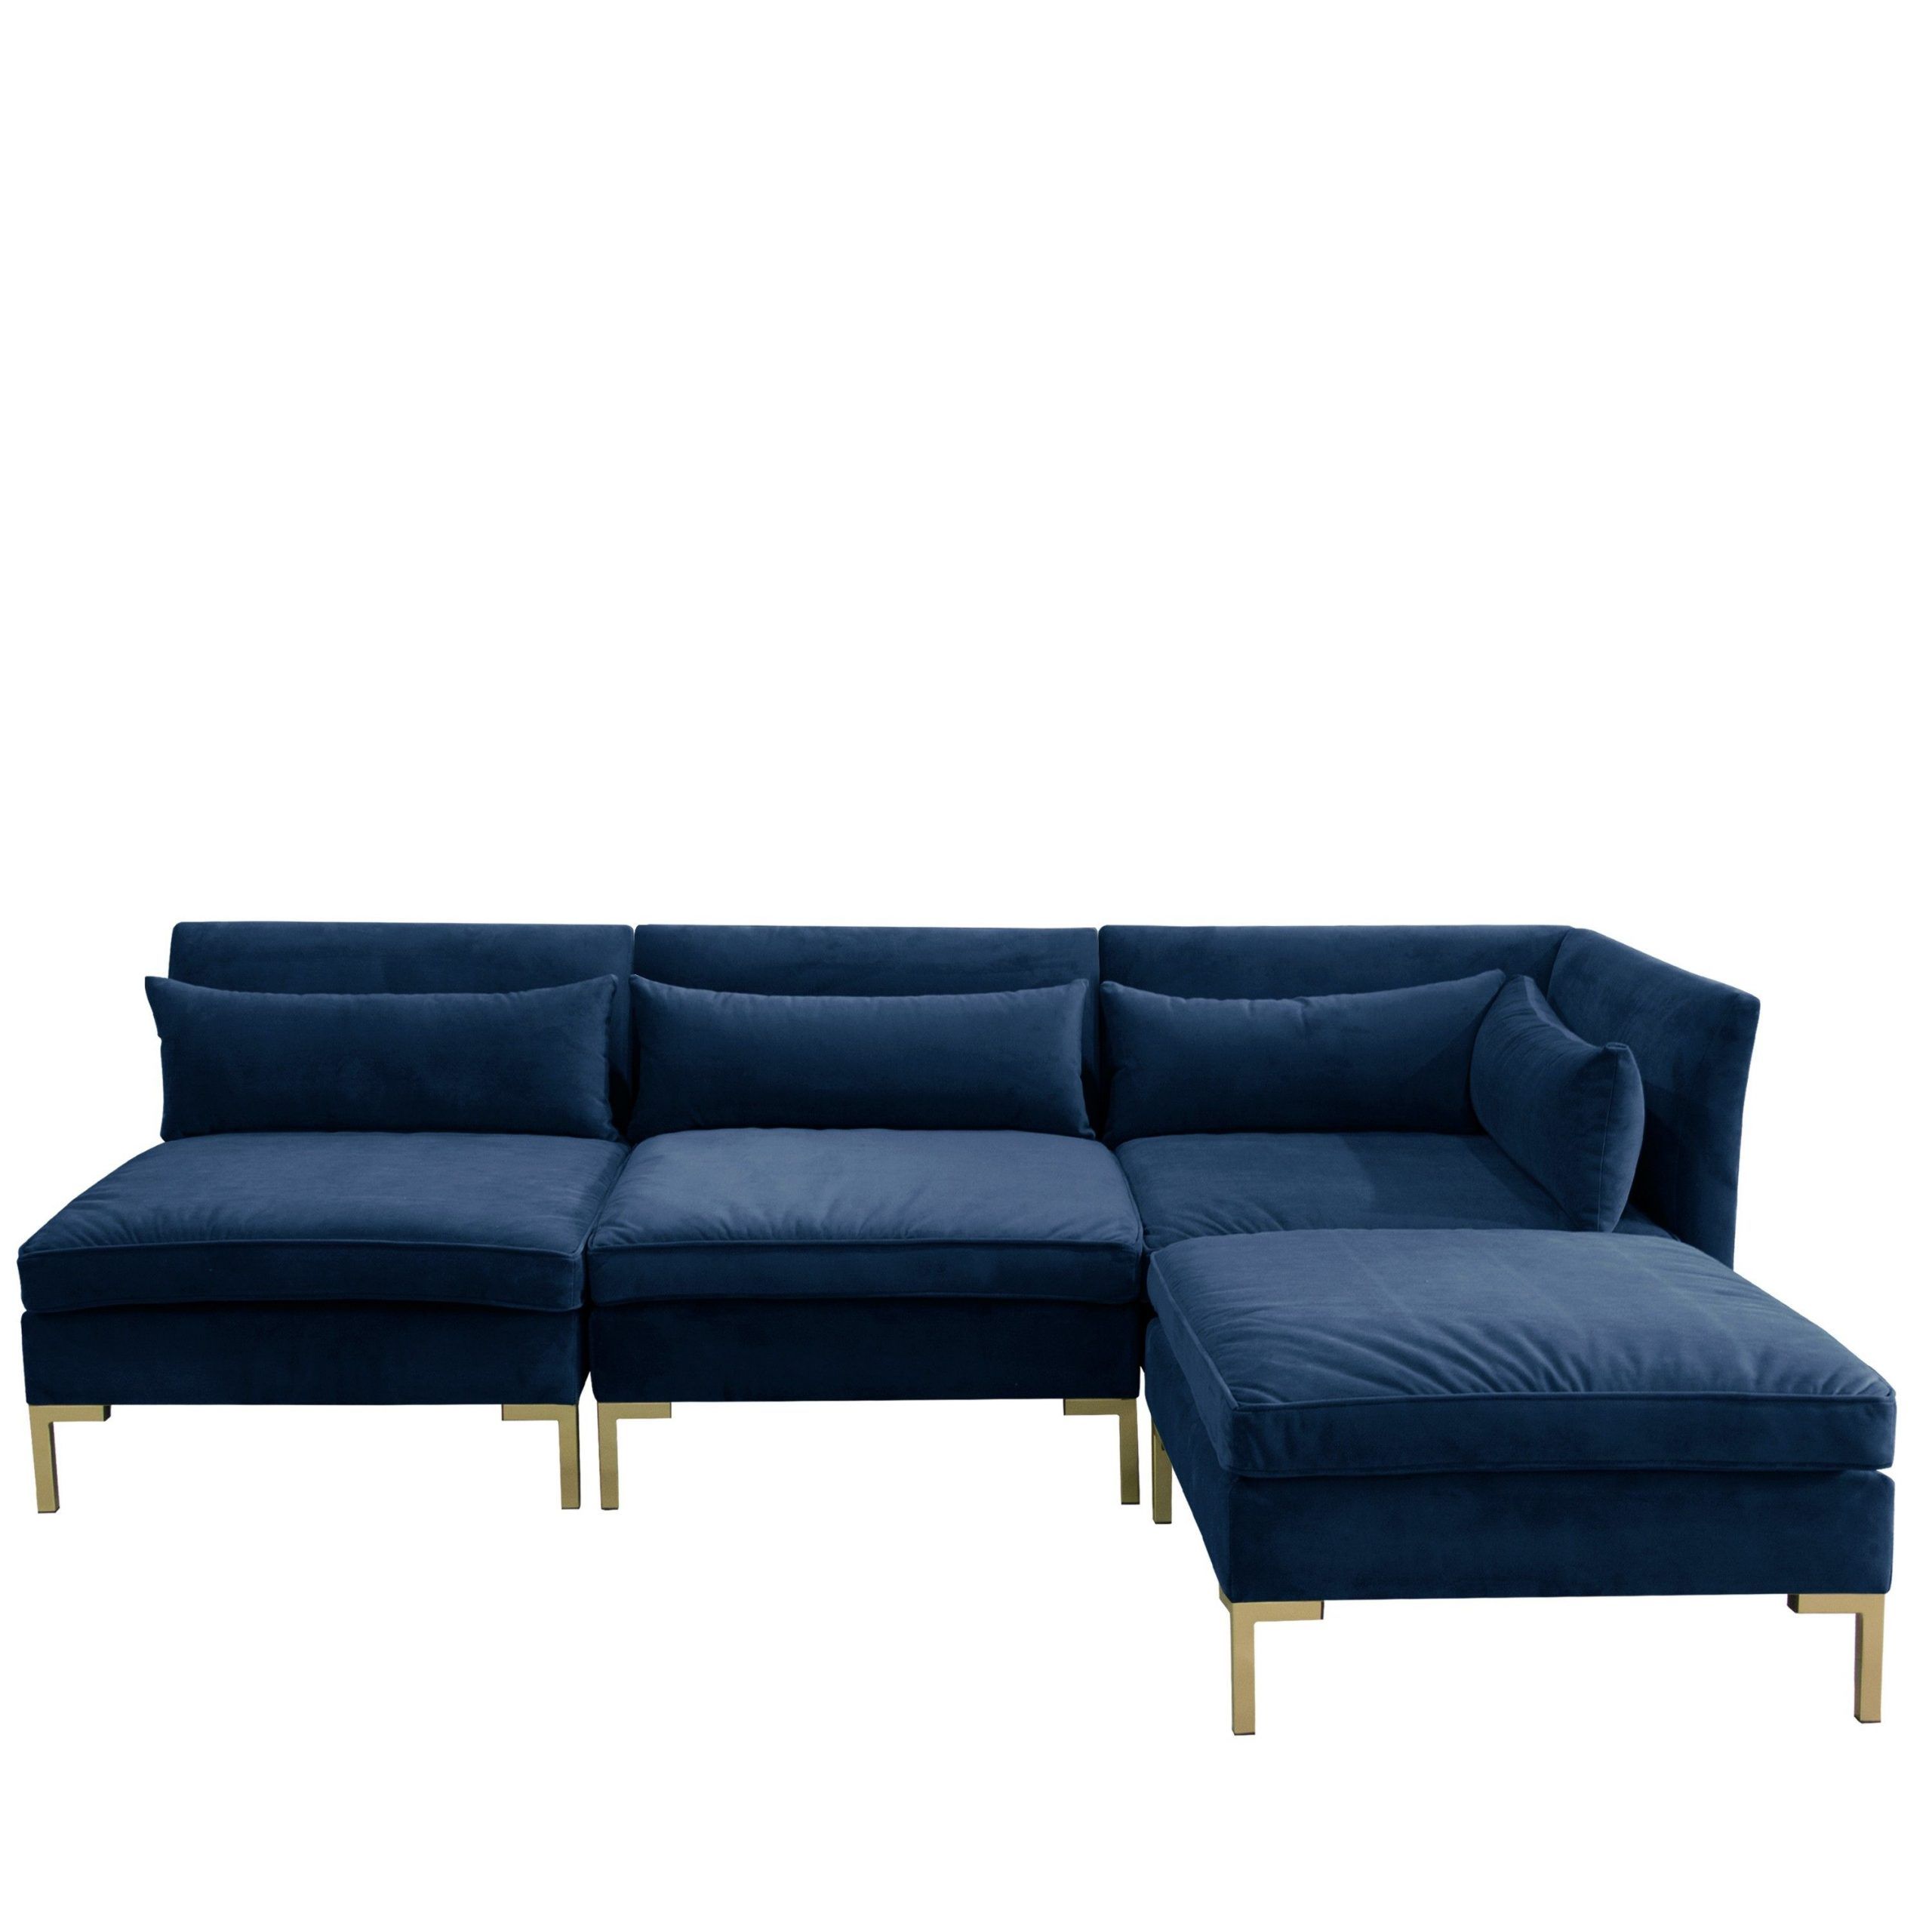 Alaina Velvet Sectional, Navy | Modular Sectional Sofa Pertaining To 4pc Alexis Sectional Sofas With Silver Metal Y Legs (View 9 of 15)